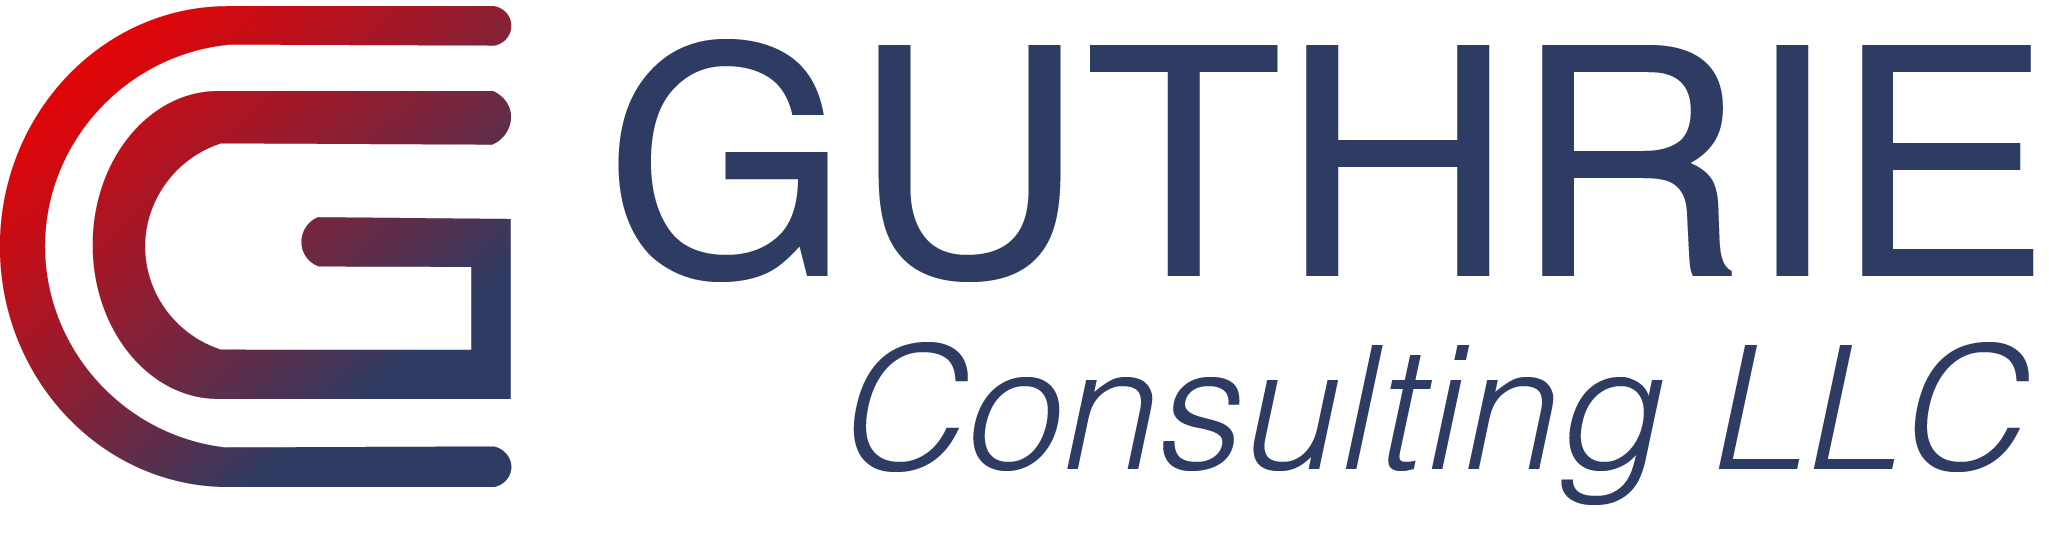 Guthrie Consulting LLC